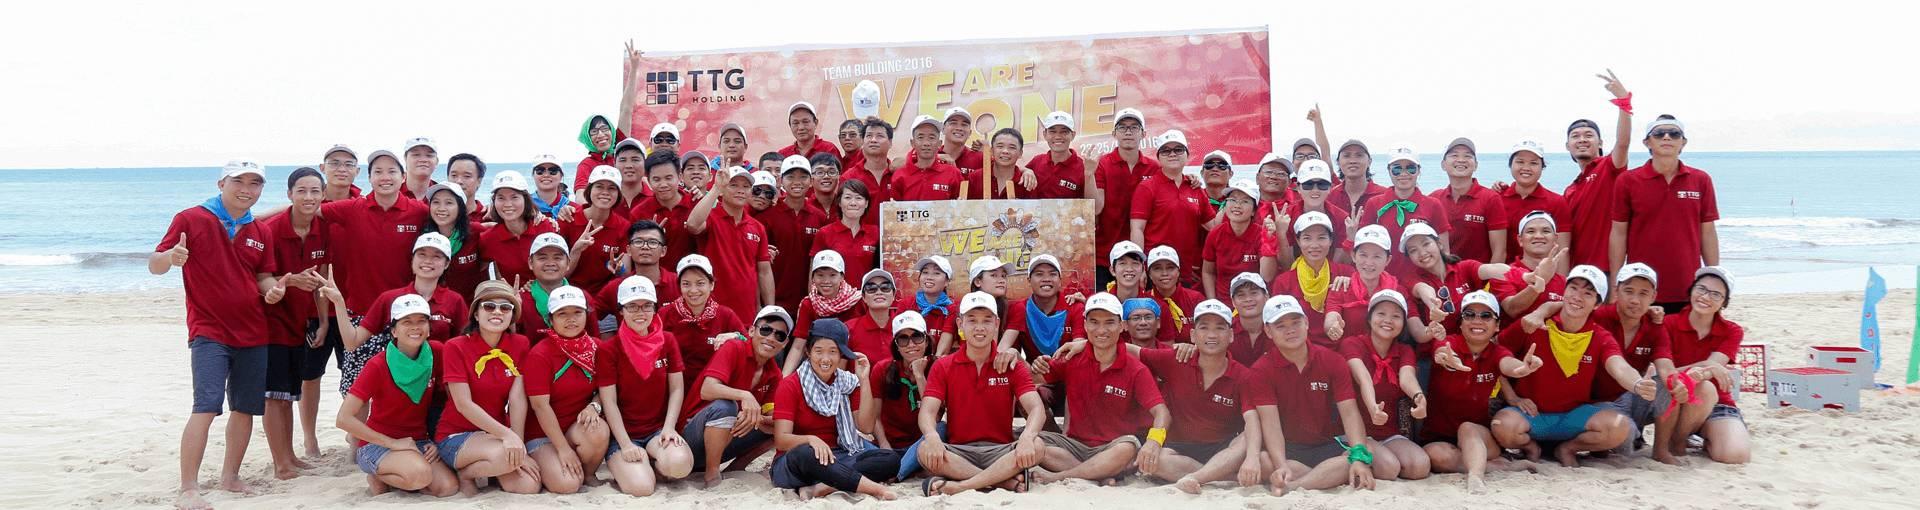 Trung Thuy Group